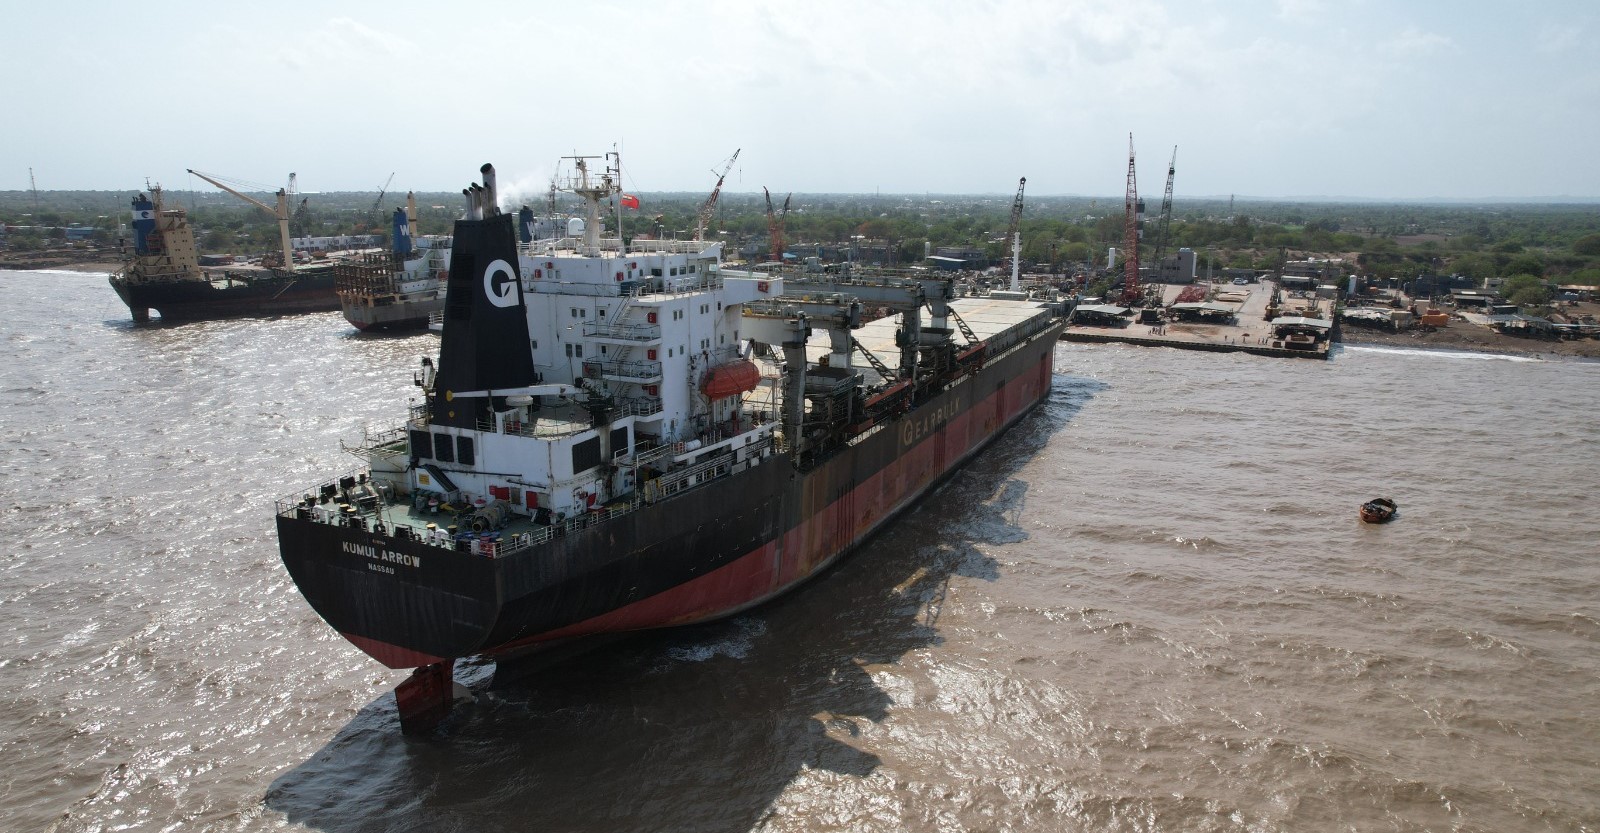 Ship recycling : A ray of hope on the horizon